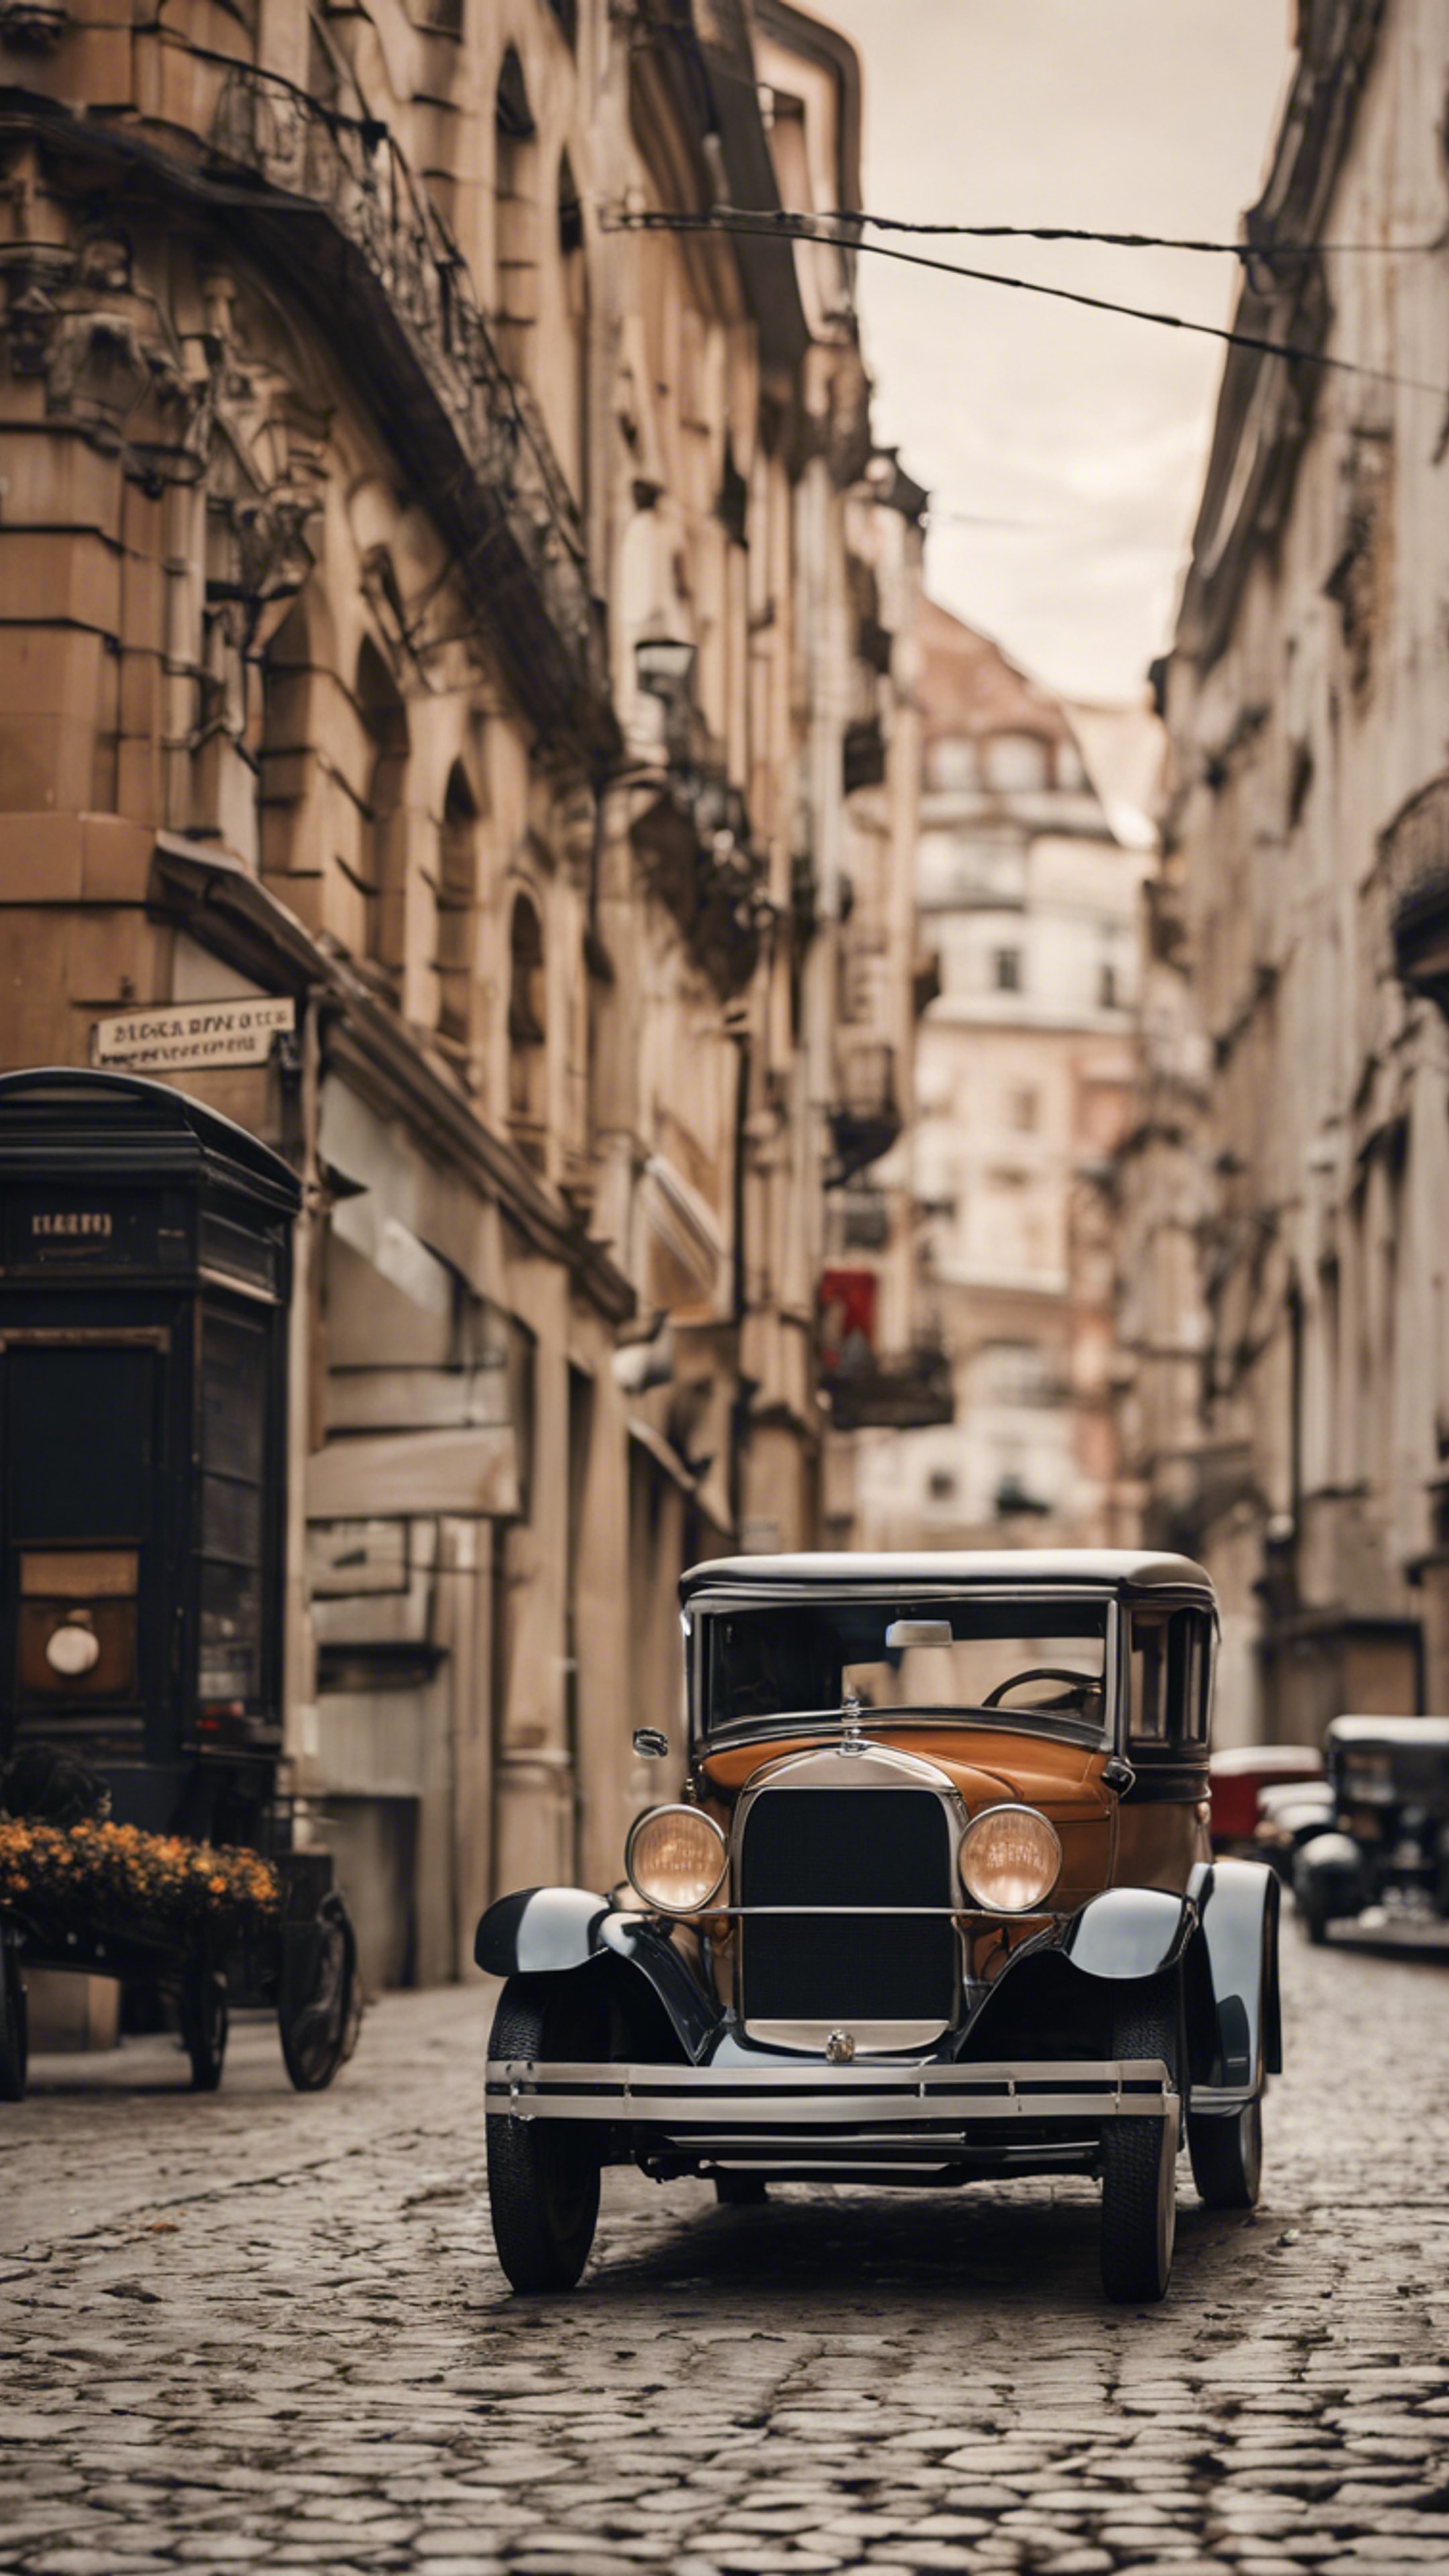 A nostalgic cityscape in the 1920s with classic cars and cobblestone streets. Tapetai[d252acda6f644acf85b4]